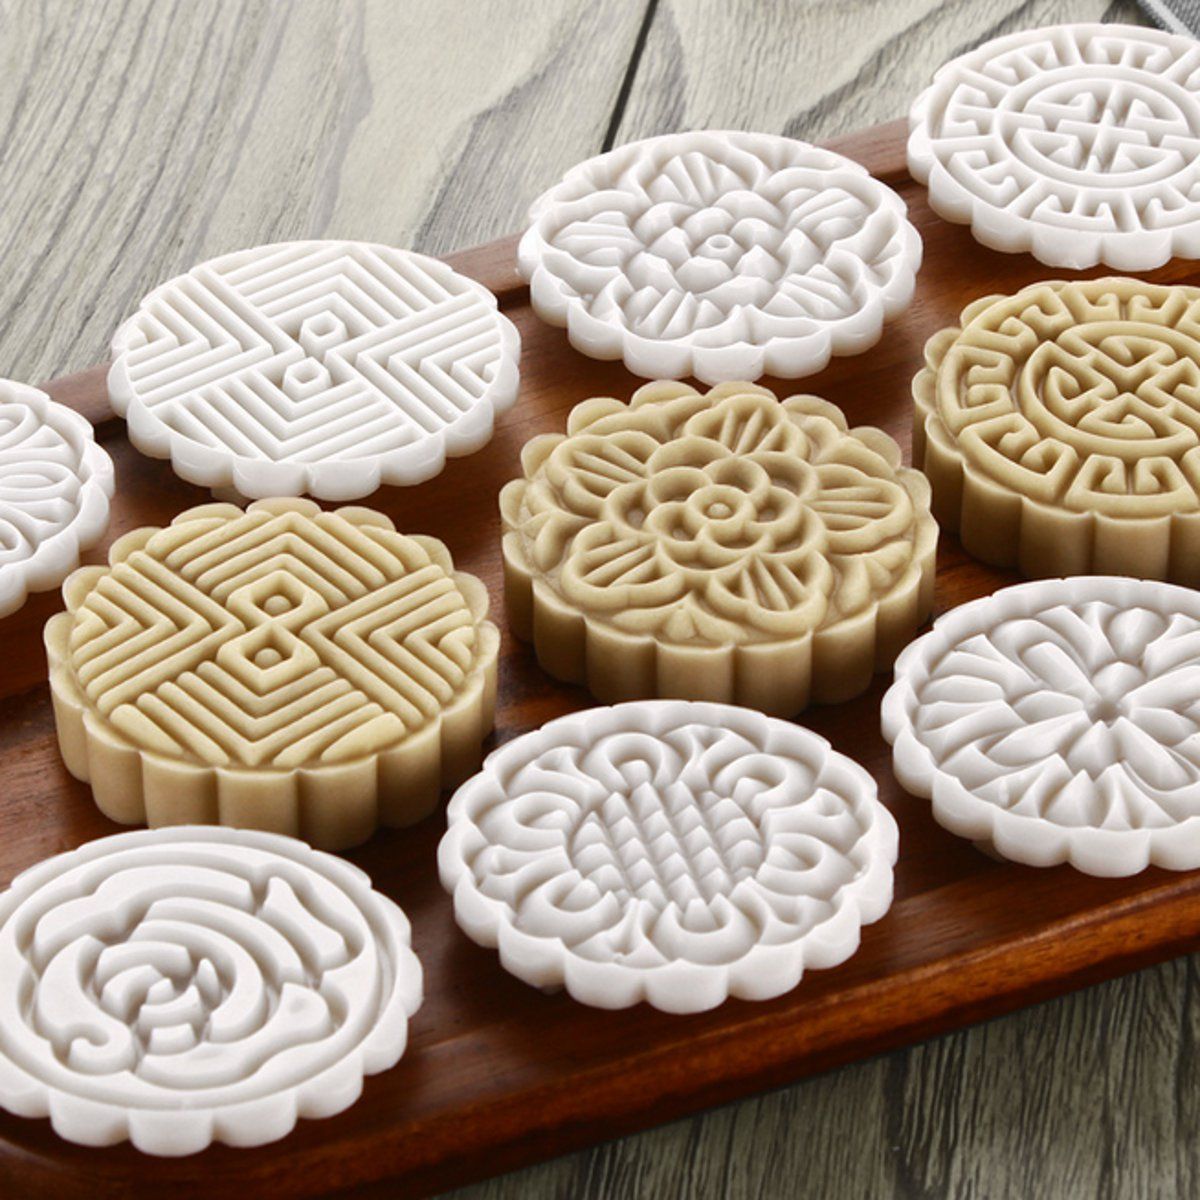 75g-8-Flower-Stamps-Moon-Cake-DIY-Mould-Hand-Pressure-Biscuit-Pastry-Mold-Baking-Tool-1373589